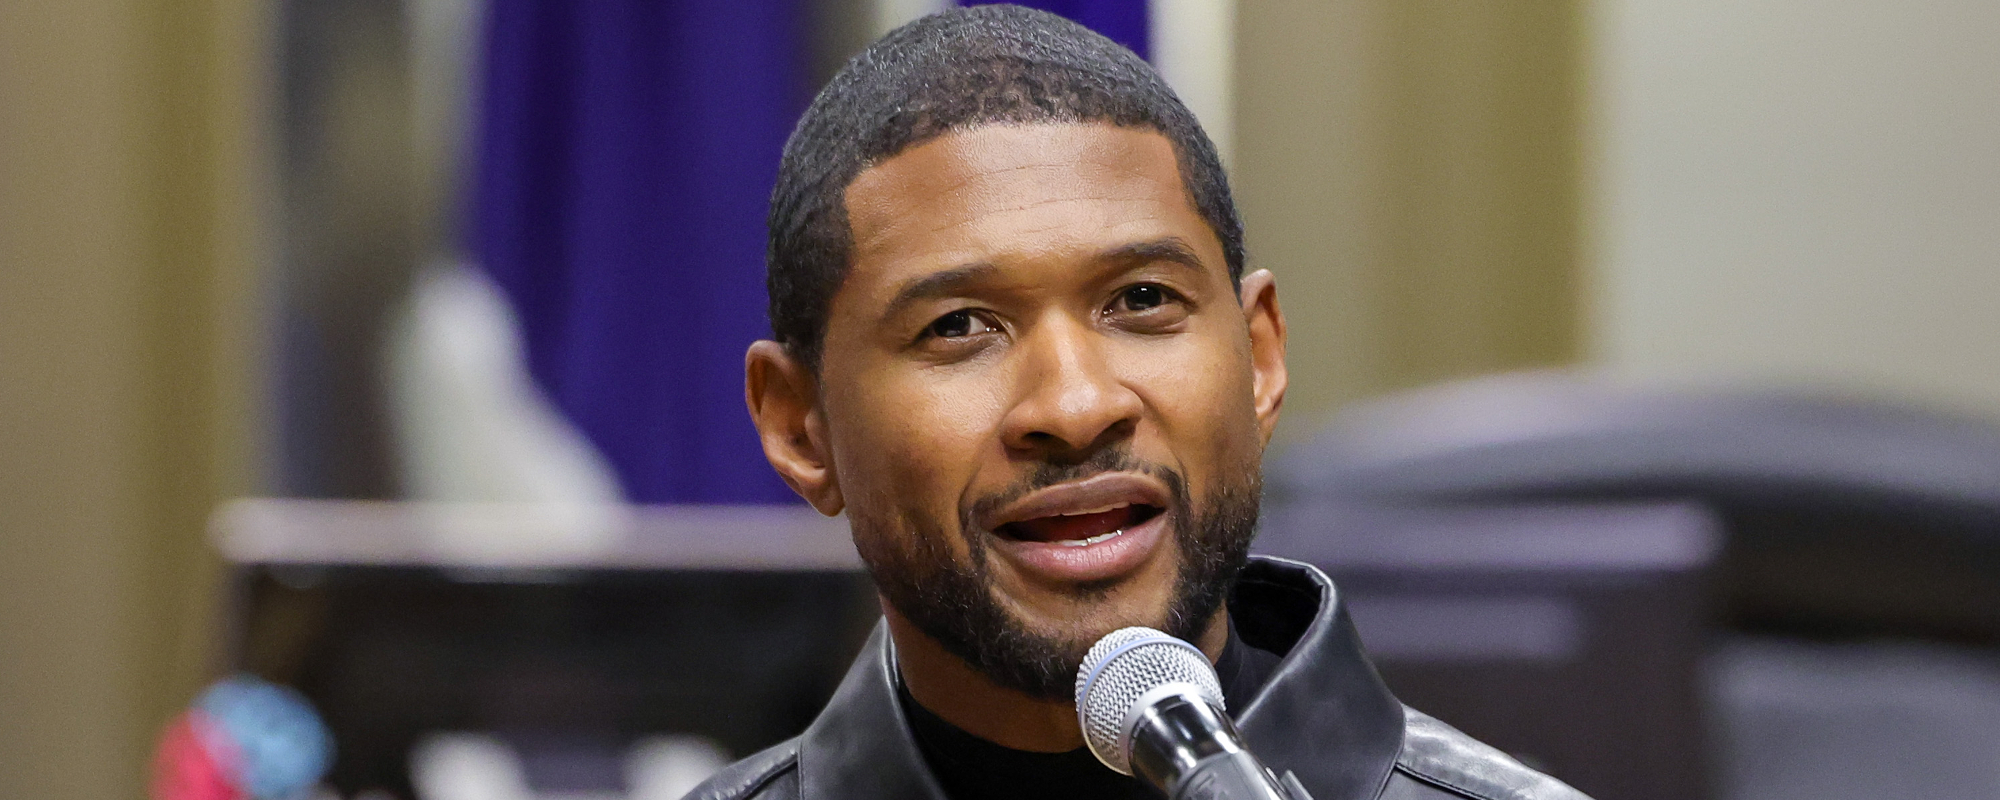 Usher Talks Perfecting His Super Bowl Halftime Performance, Addresses “the “King of R&B” Label